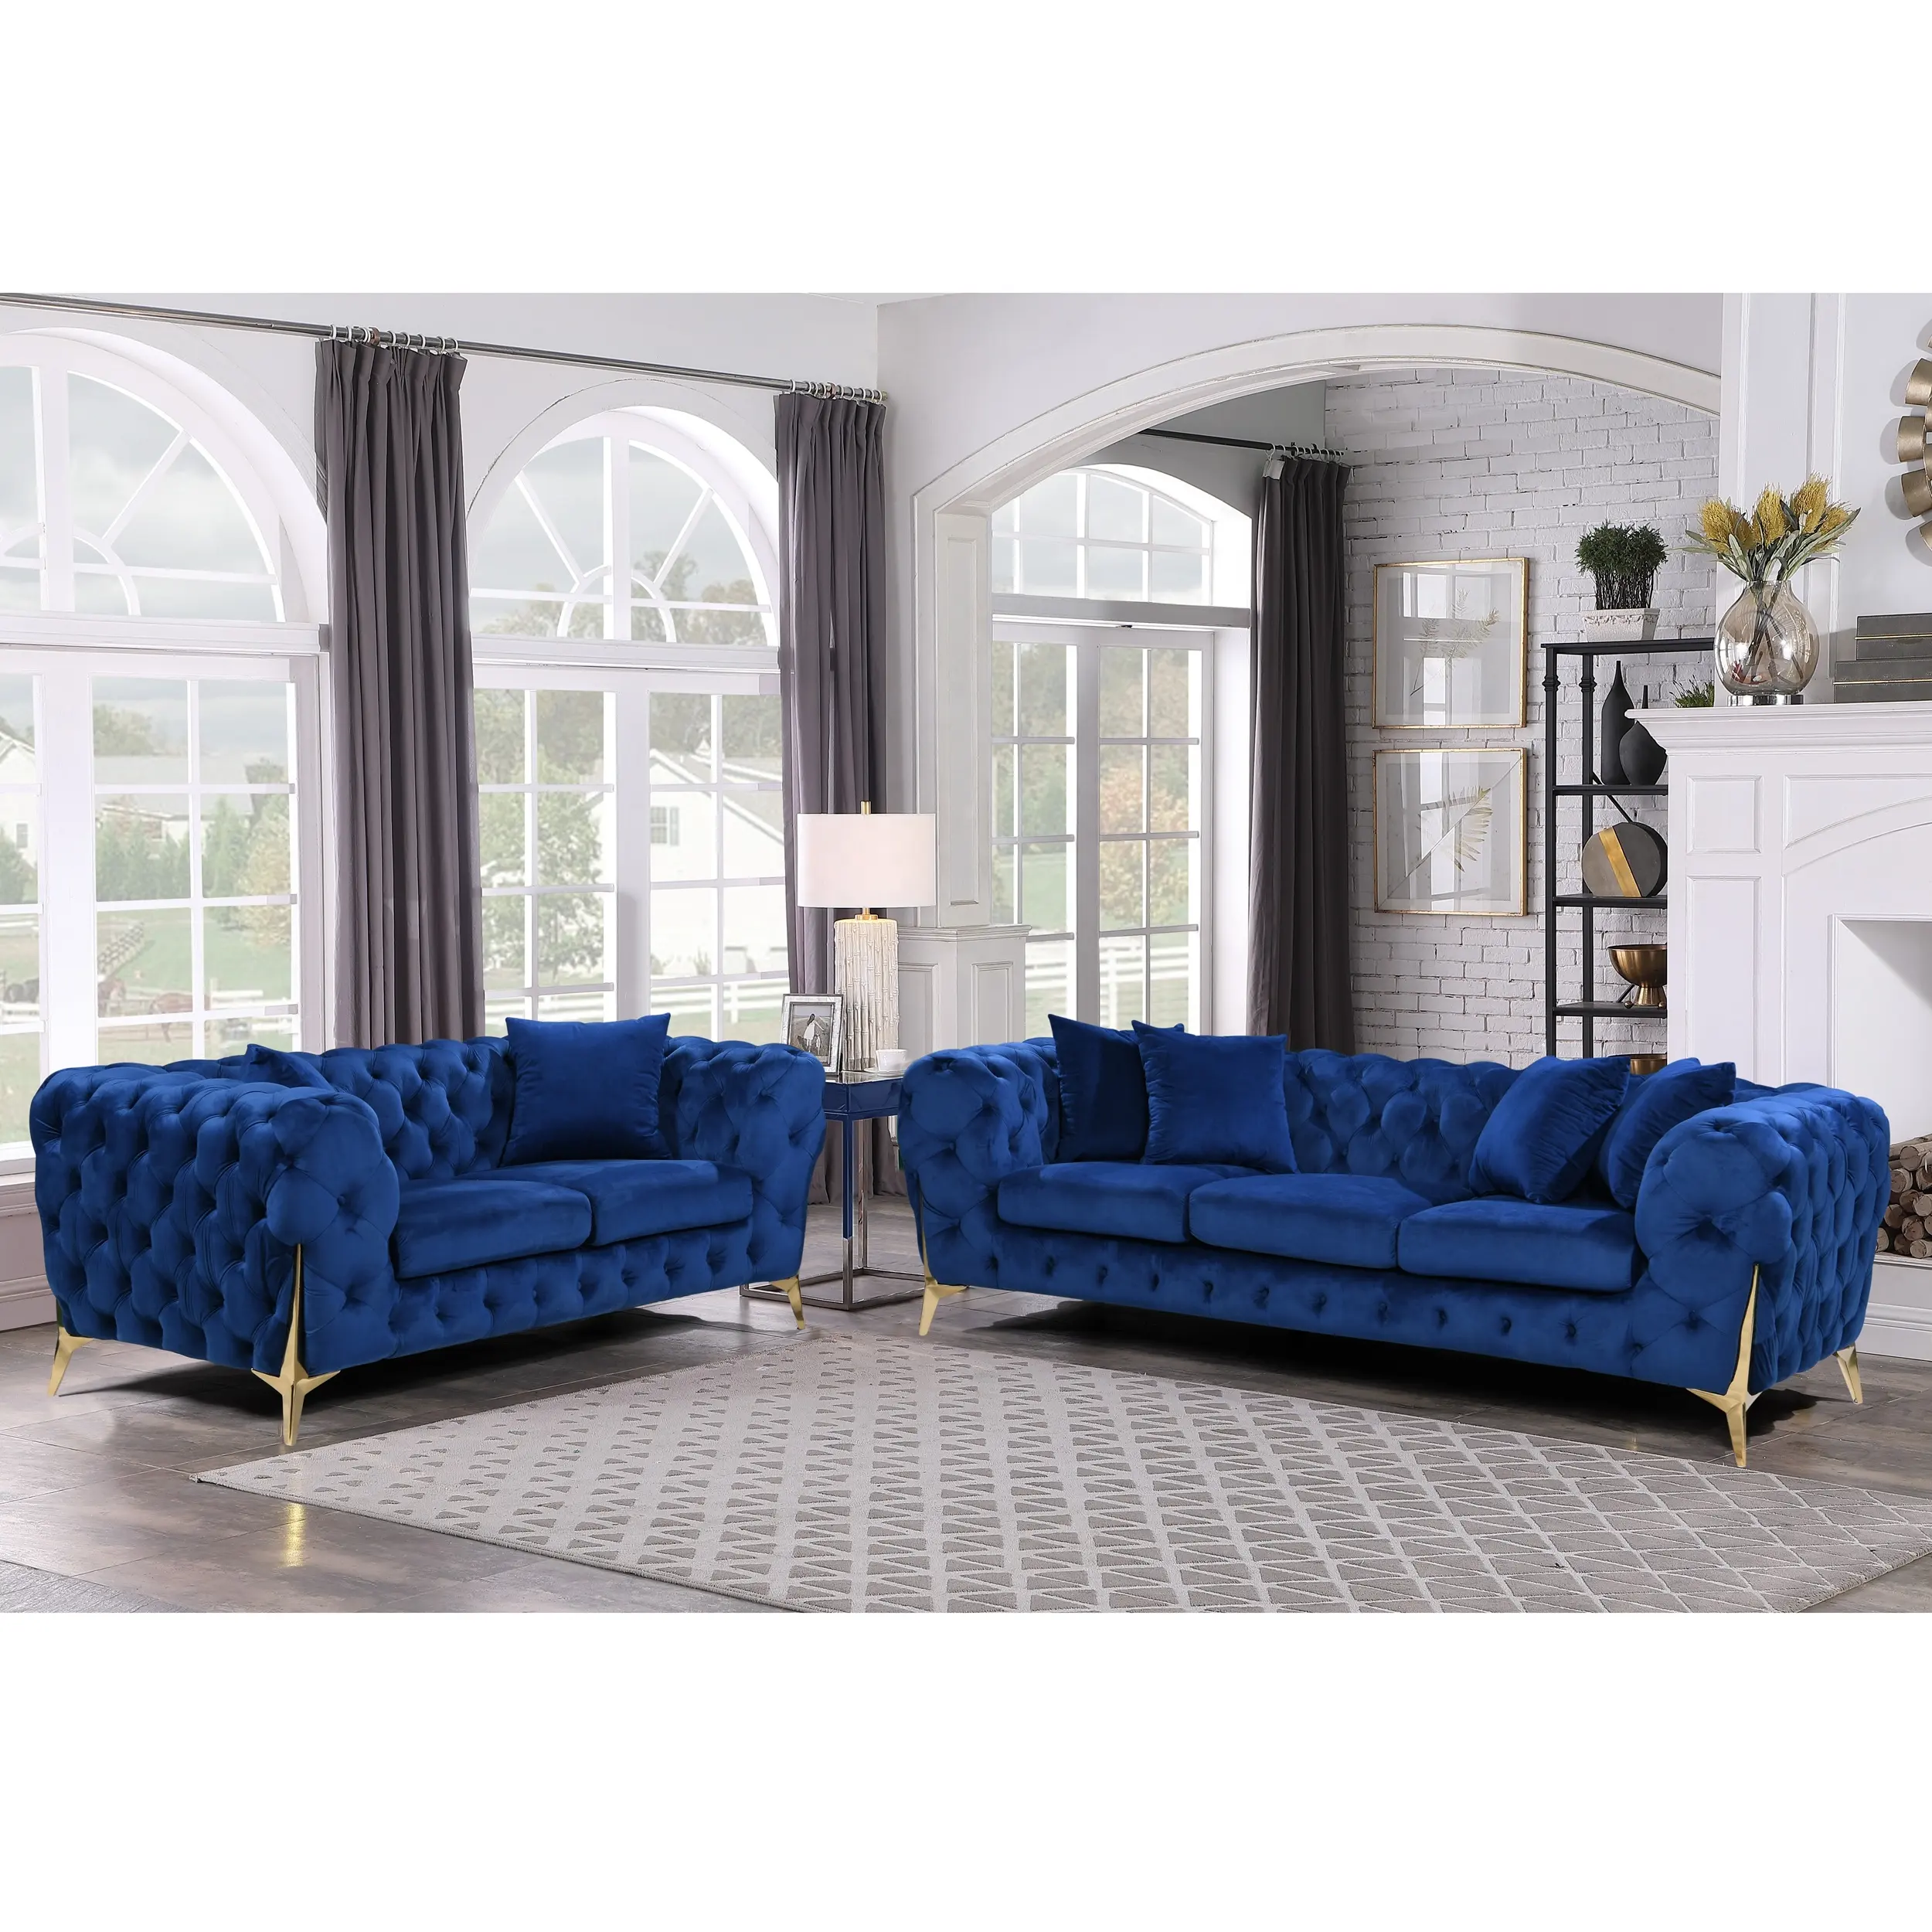 NOVA Luxury Tufted Velvet Chesterfield Couch Set Furniture Living Room Lounge Sofa Upholstered 2 seater Sofas With Gold Legs